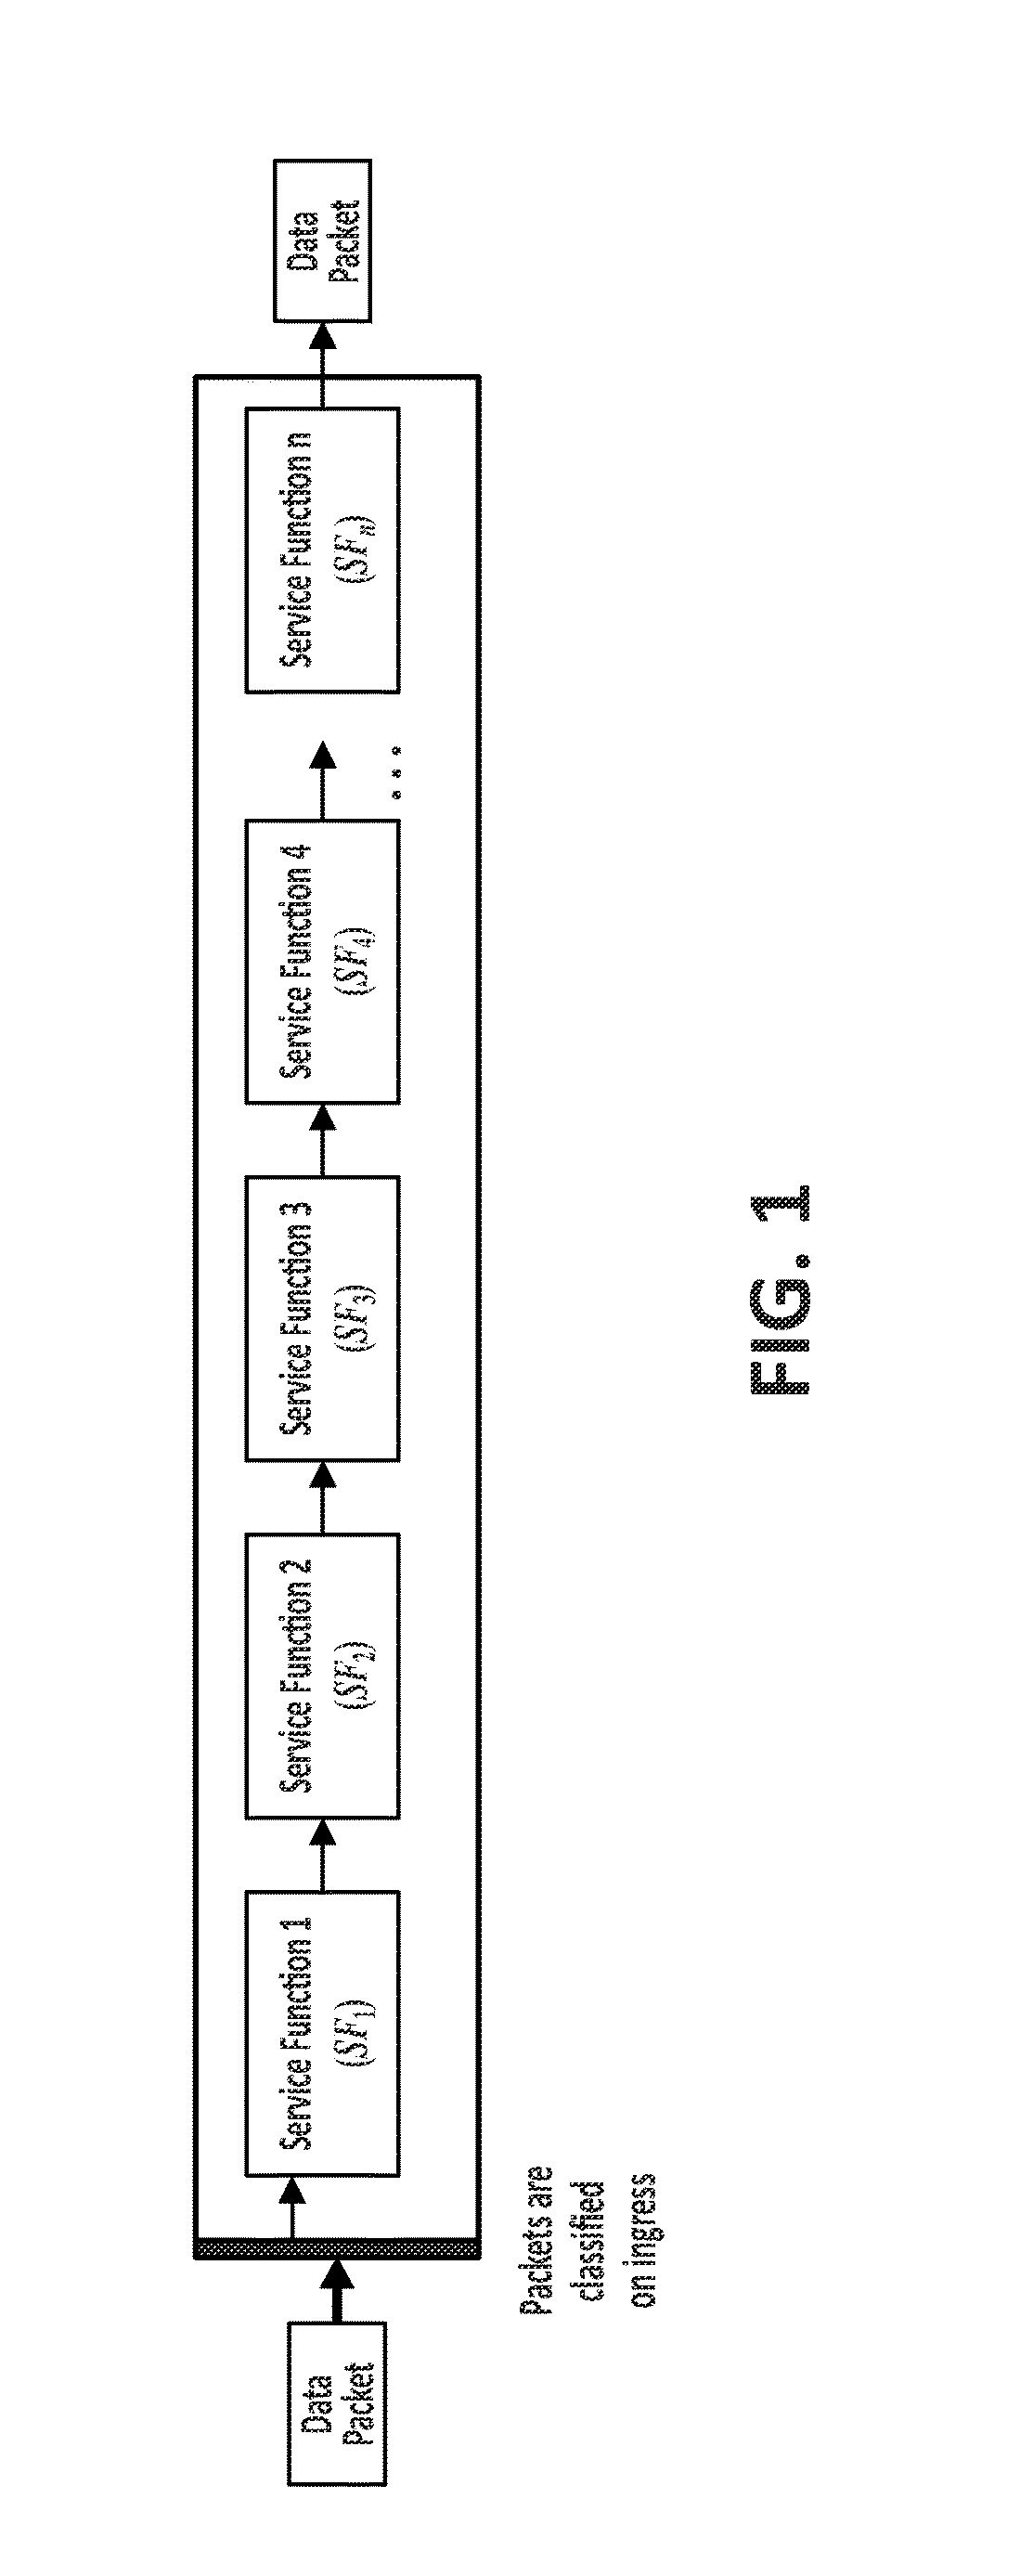 Method to assure correct data packet traversal through a particular path of a network